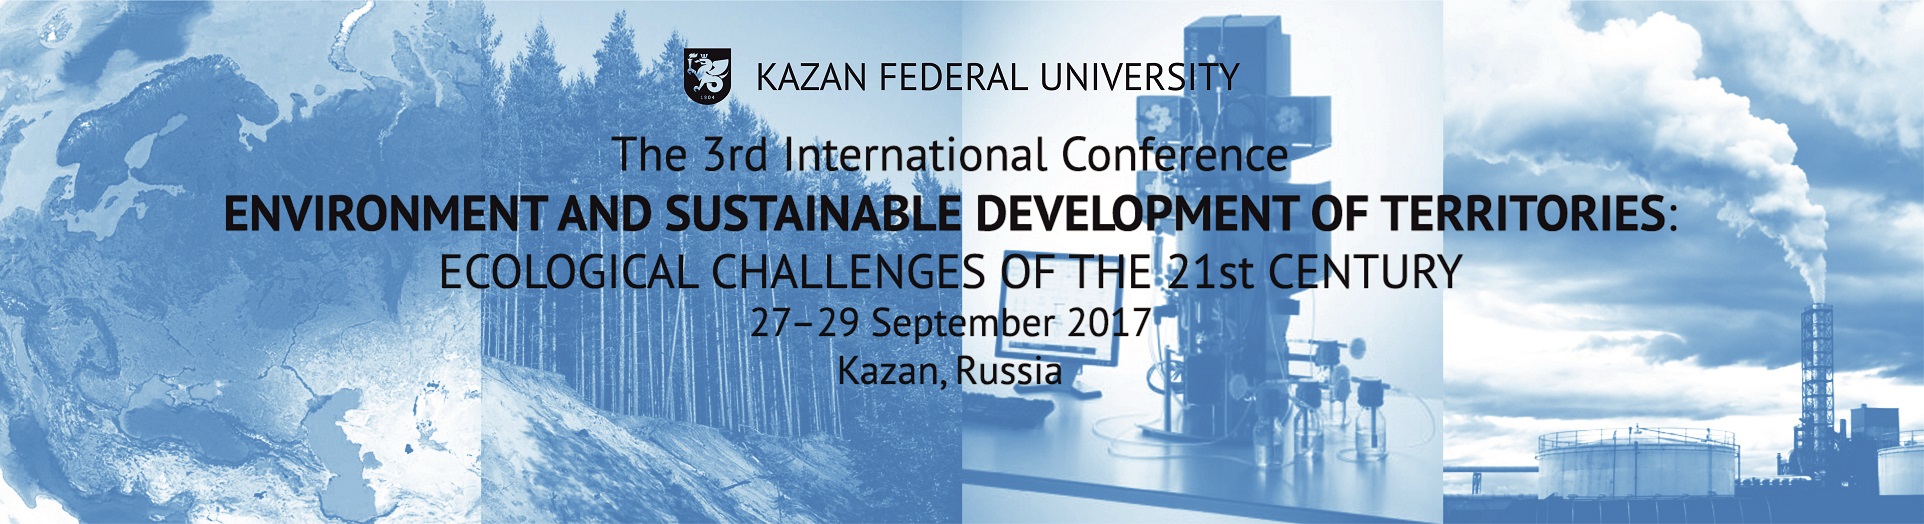 ПОРТАЛ КФУ \ Academic Units \ Natural Sciences \ Institute of Environmental Sciences \ Environment and Sustainable Development of Territories: Ecological Challenges of the 21st Century \ Deadlines